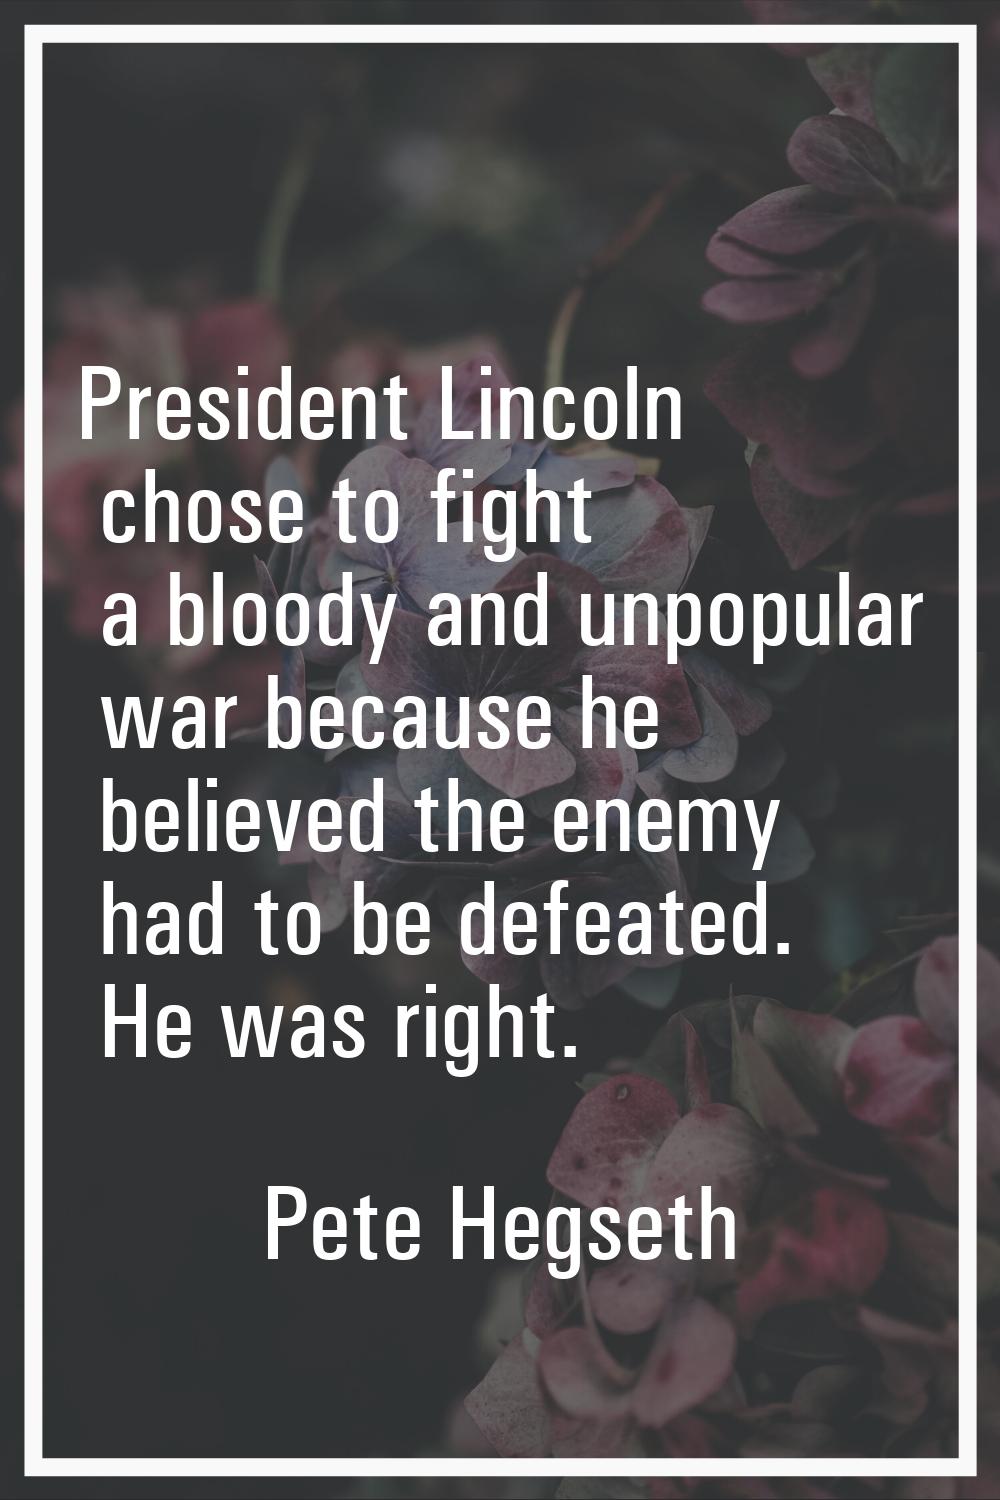 President Lincoln chose to fight a bloody and unpopular war because he believed the enemy had to be